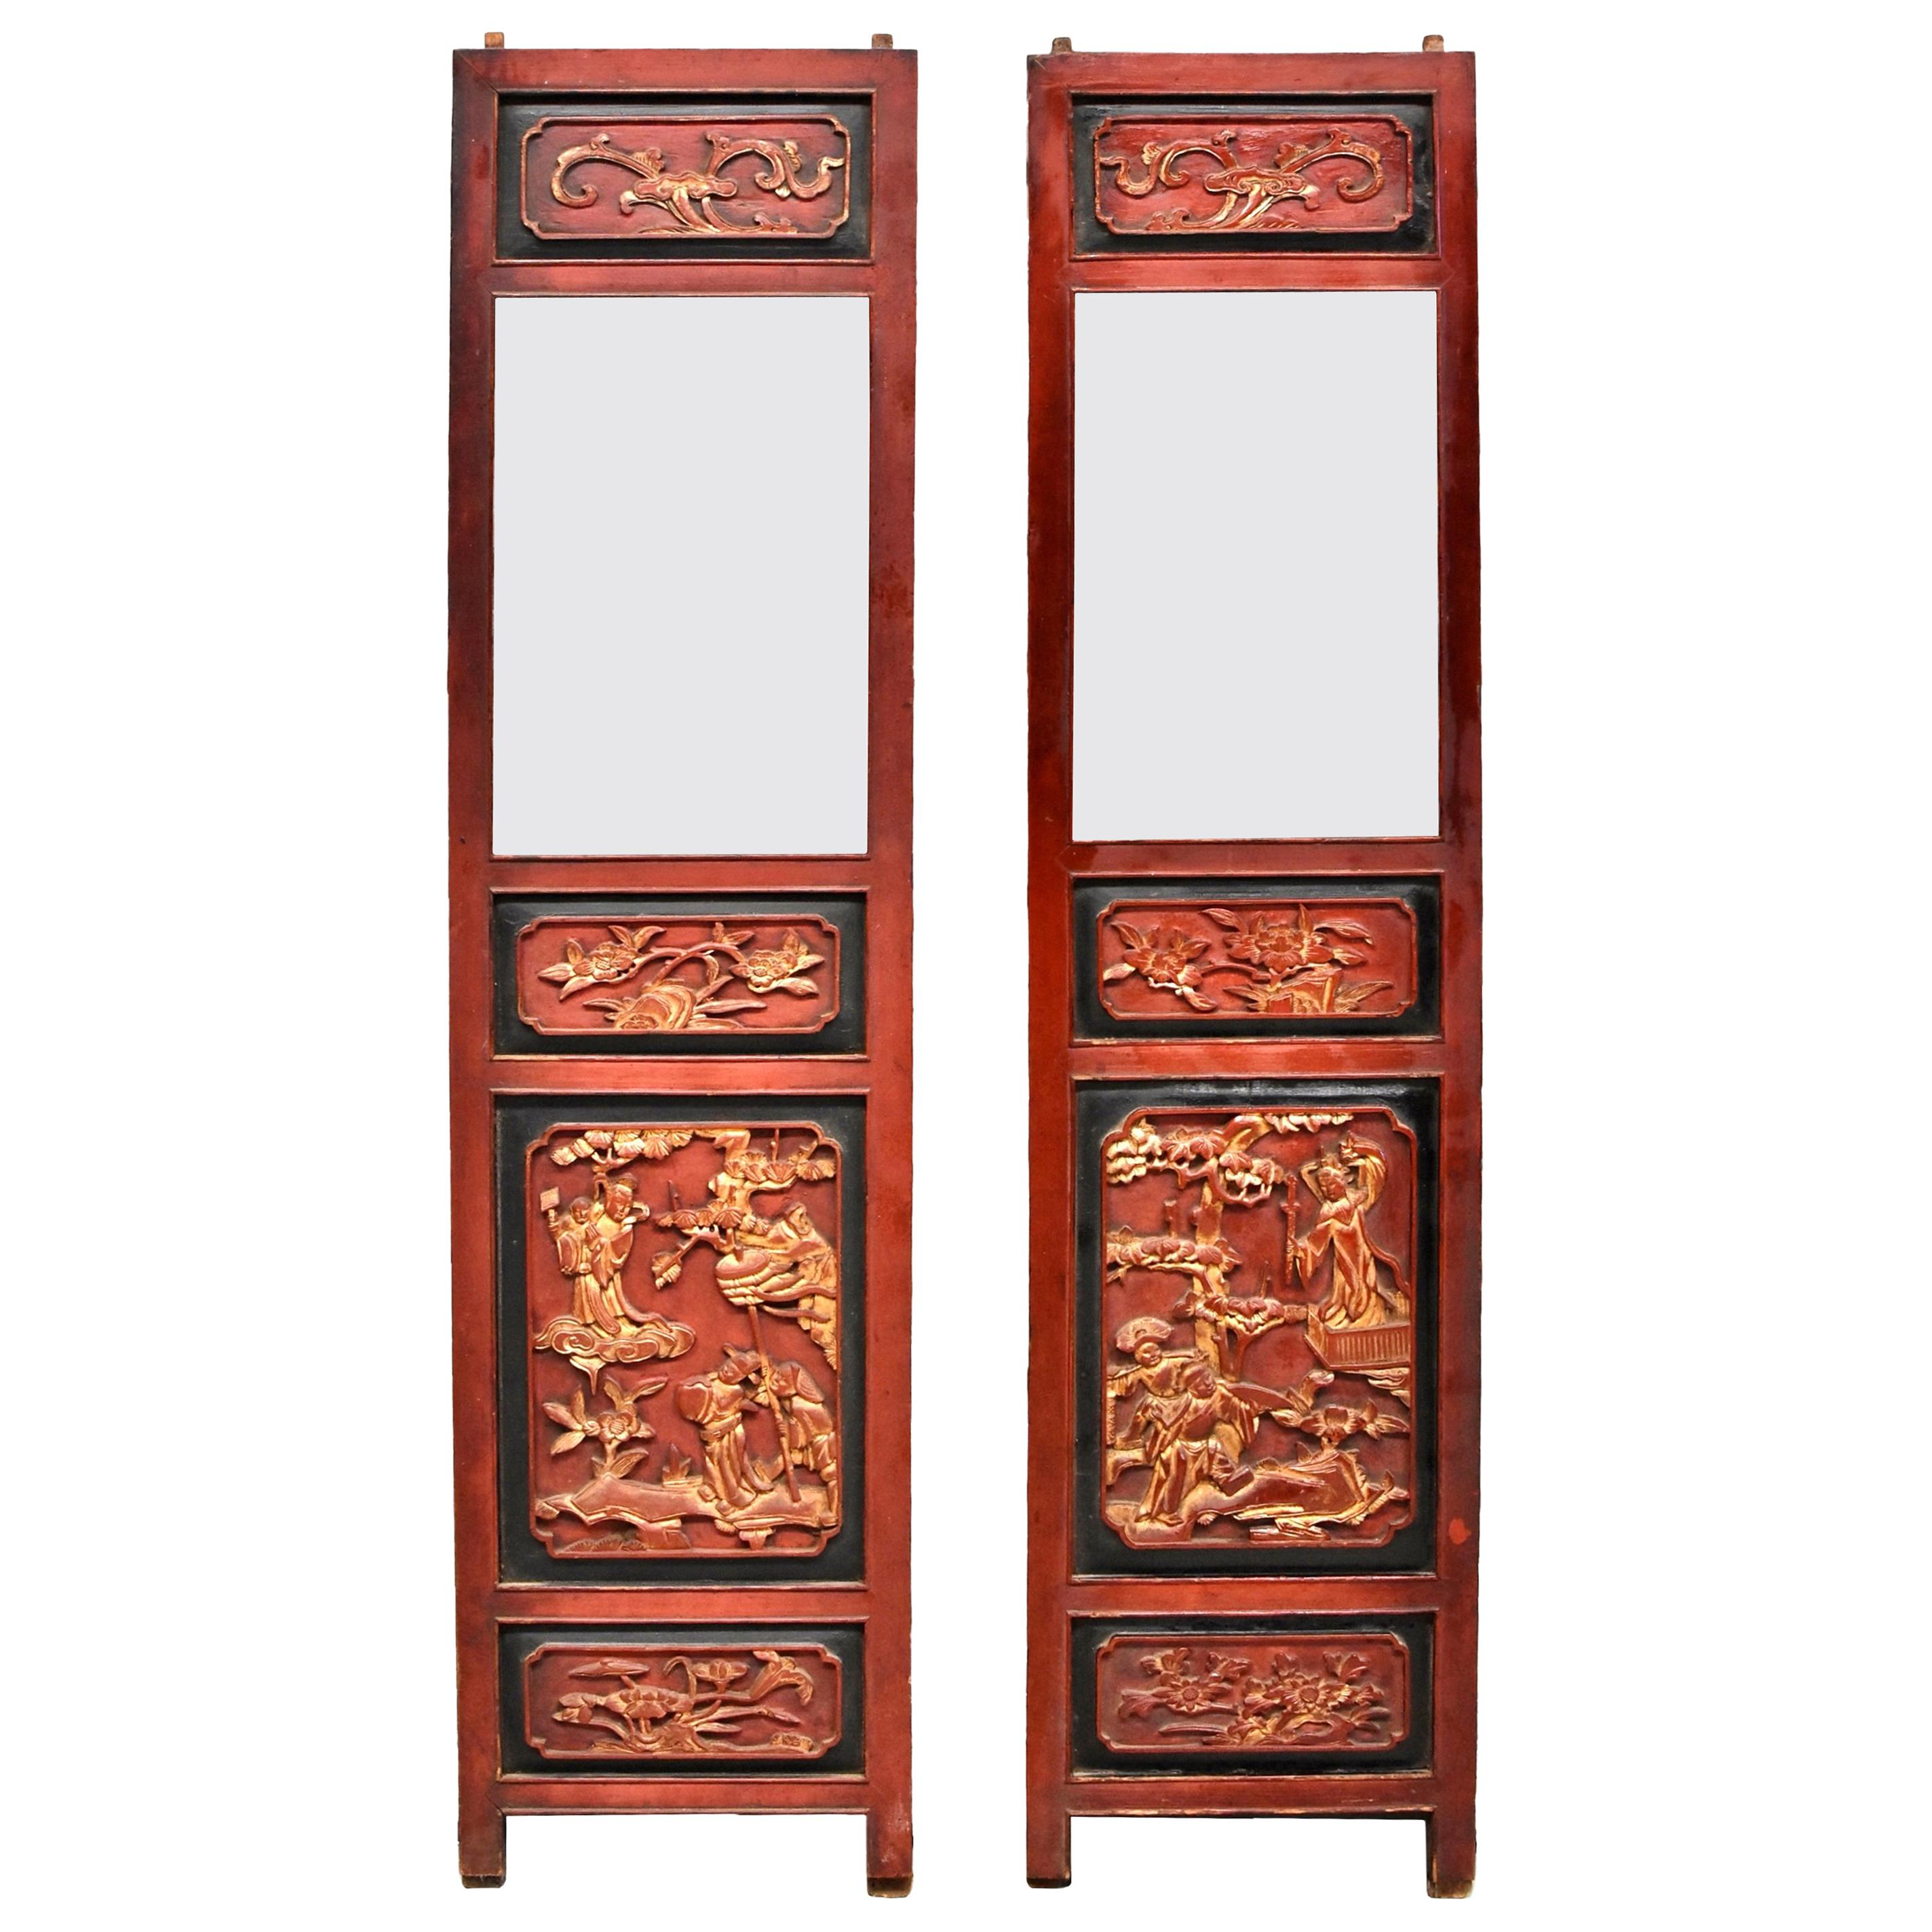 Pair of Red and Gold Carved Antique Chinese Screens